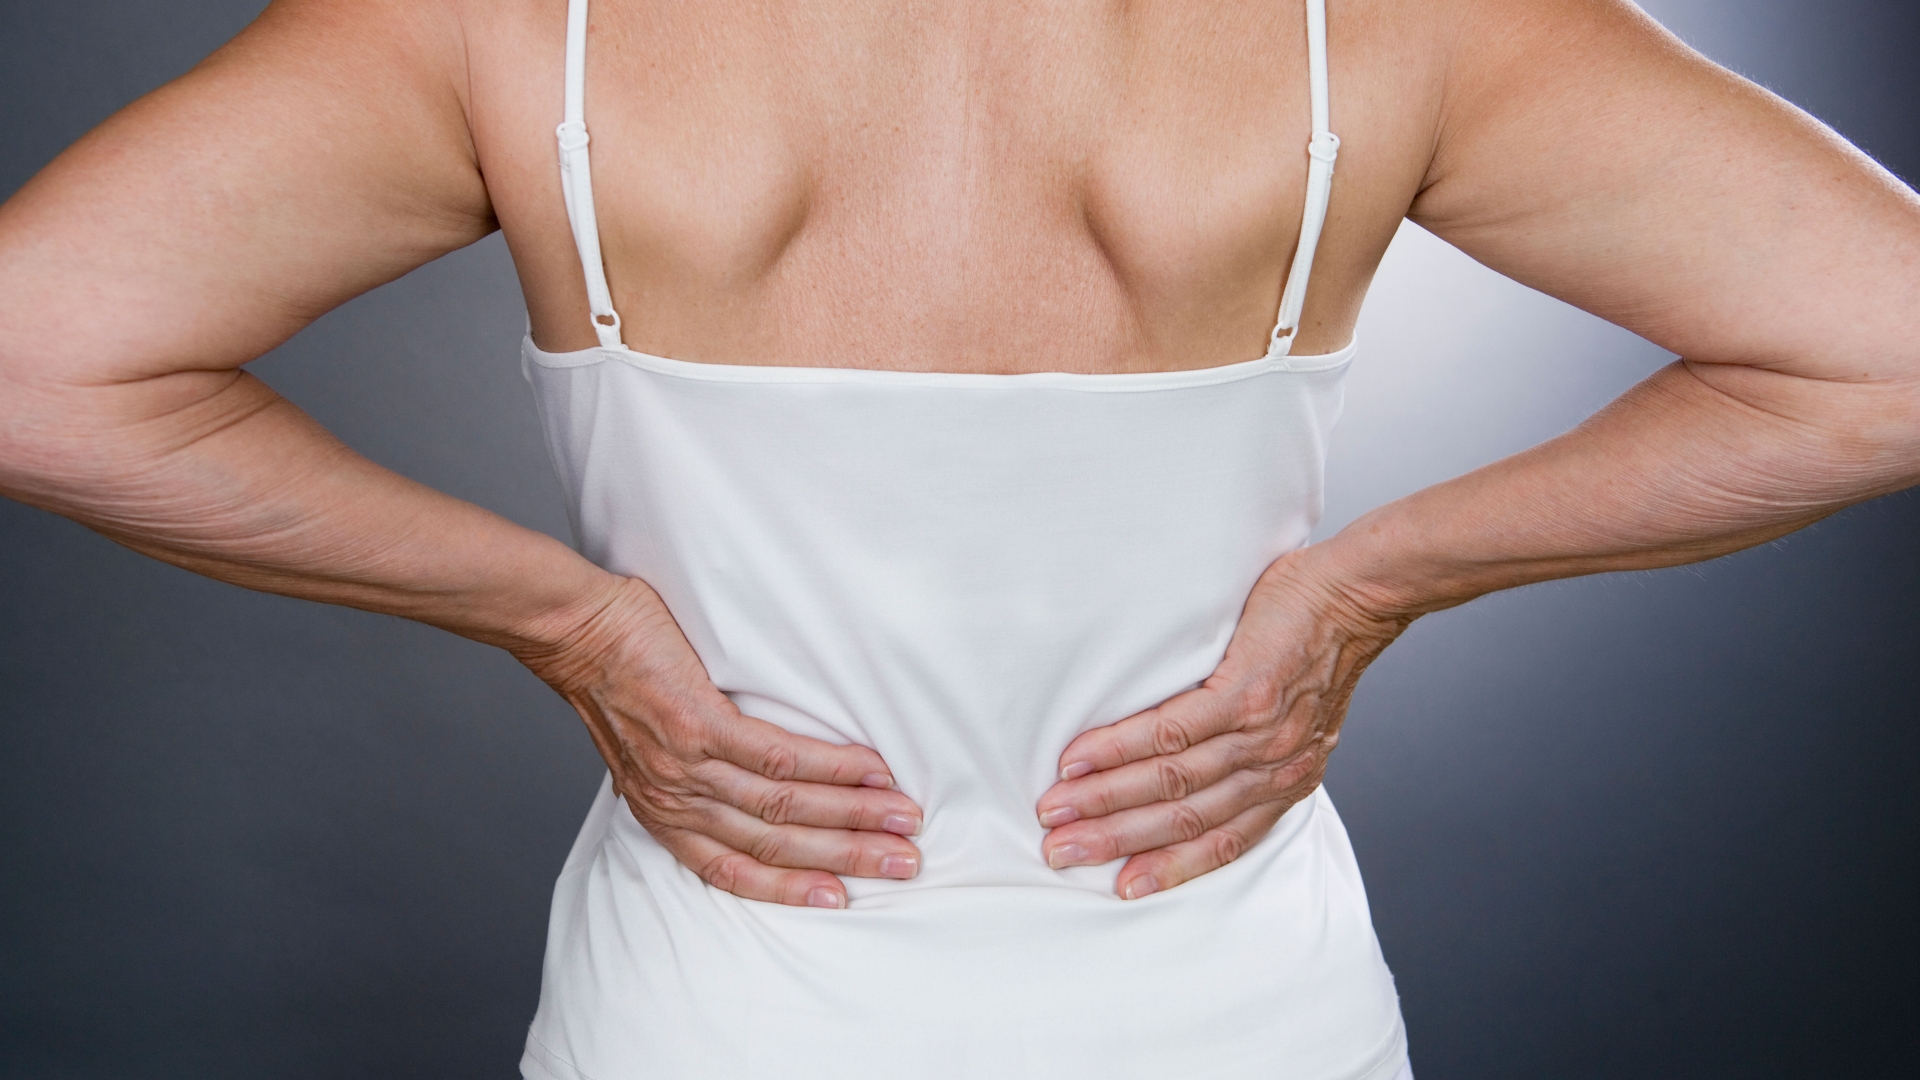 I’m a physio guru - here’s 5 ways to ease back pain & cut your risk of 3 killers